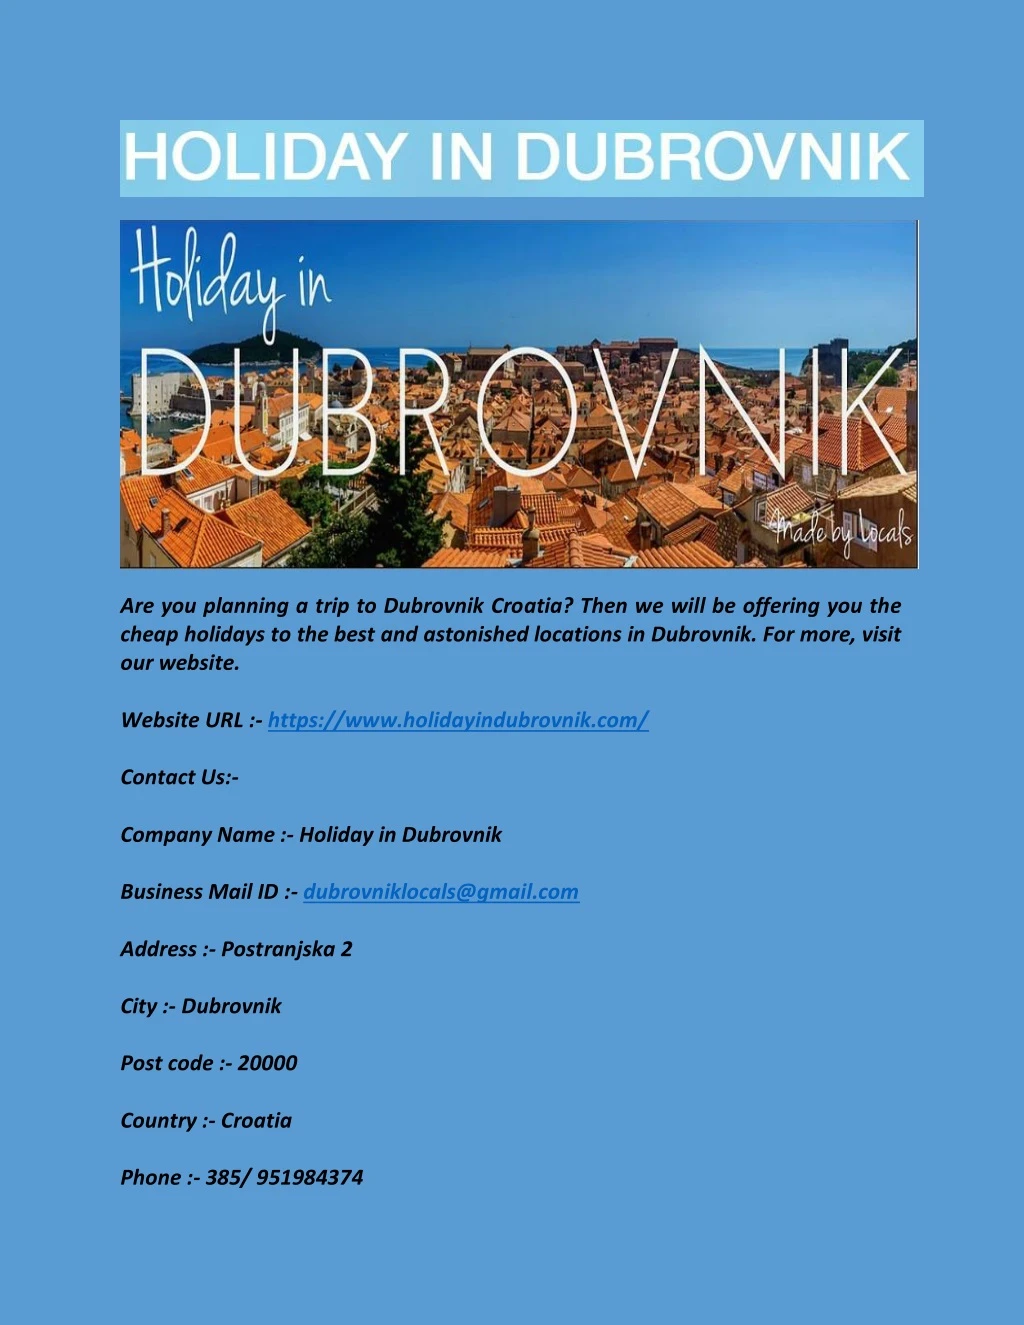 are you planning a trip to dubrovnik croatia then